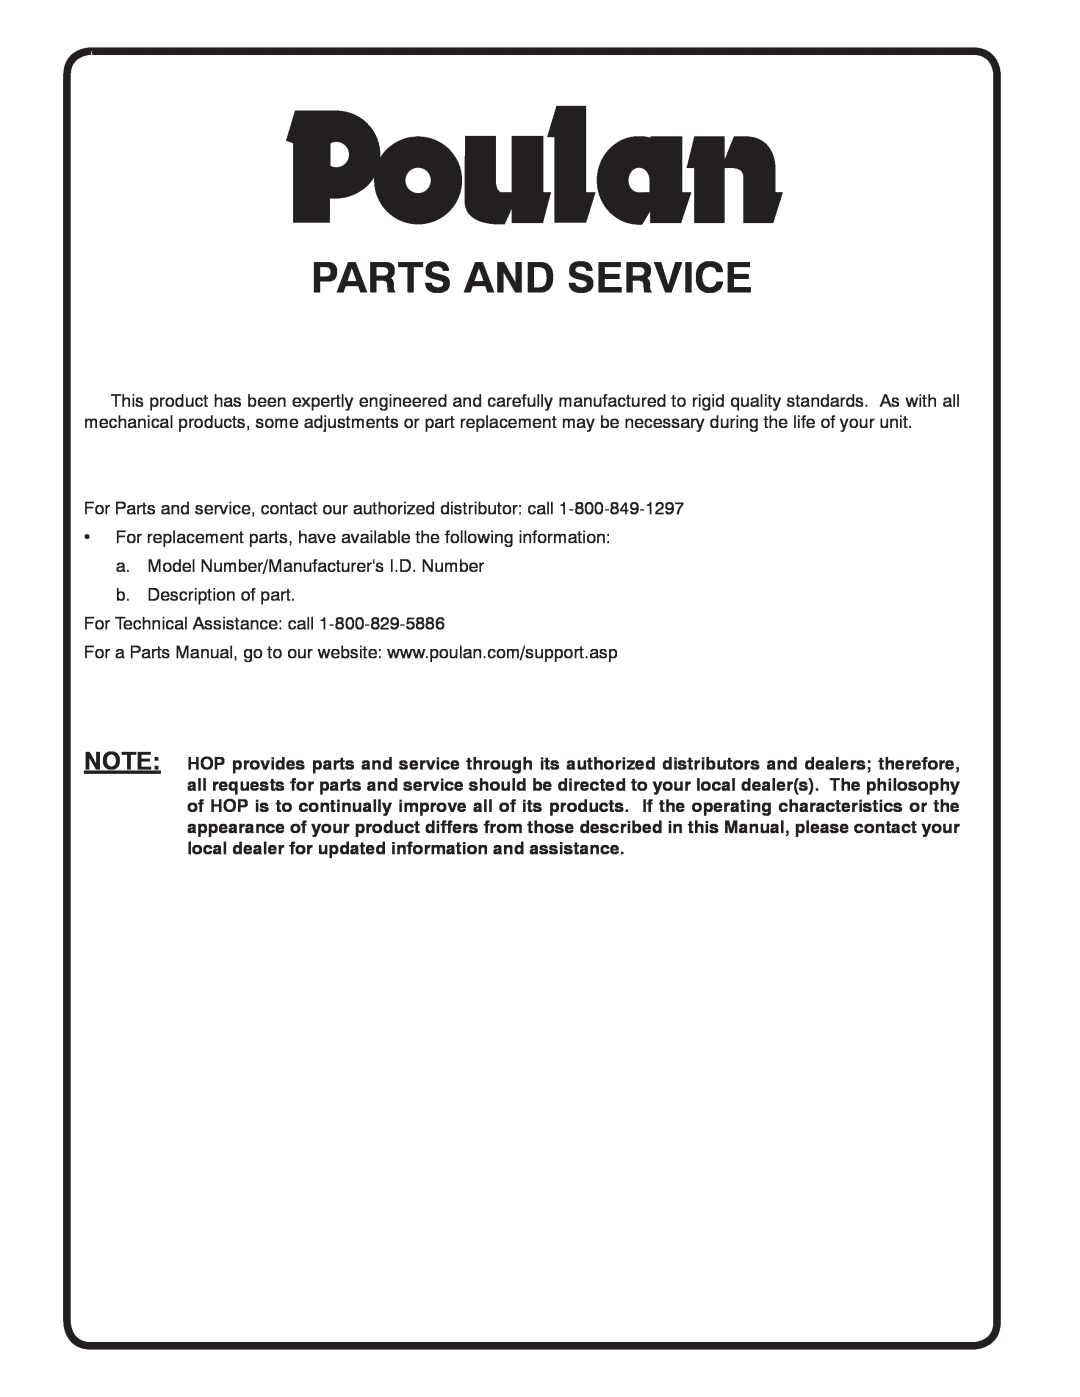 Poulan 413288 manual Parts And Service 